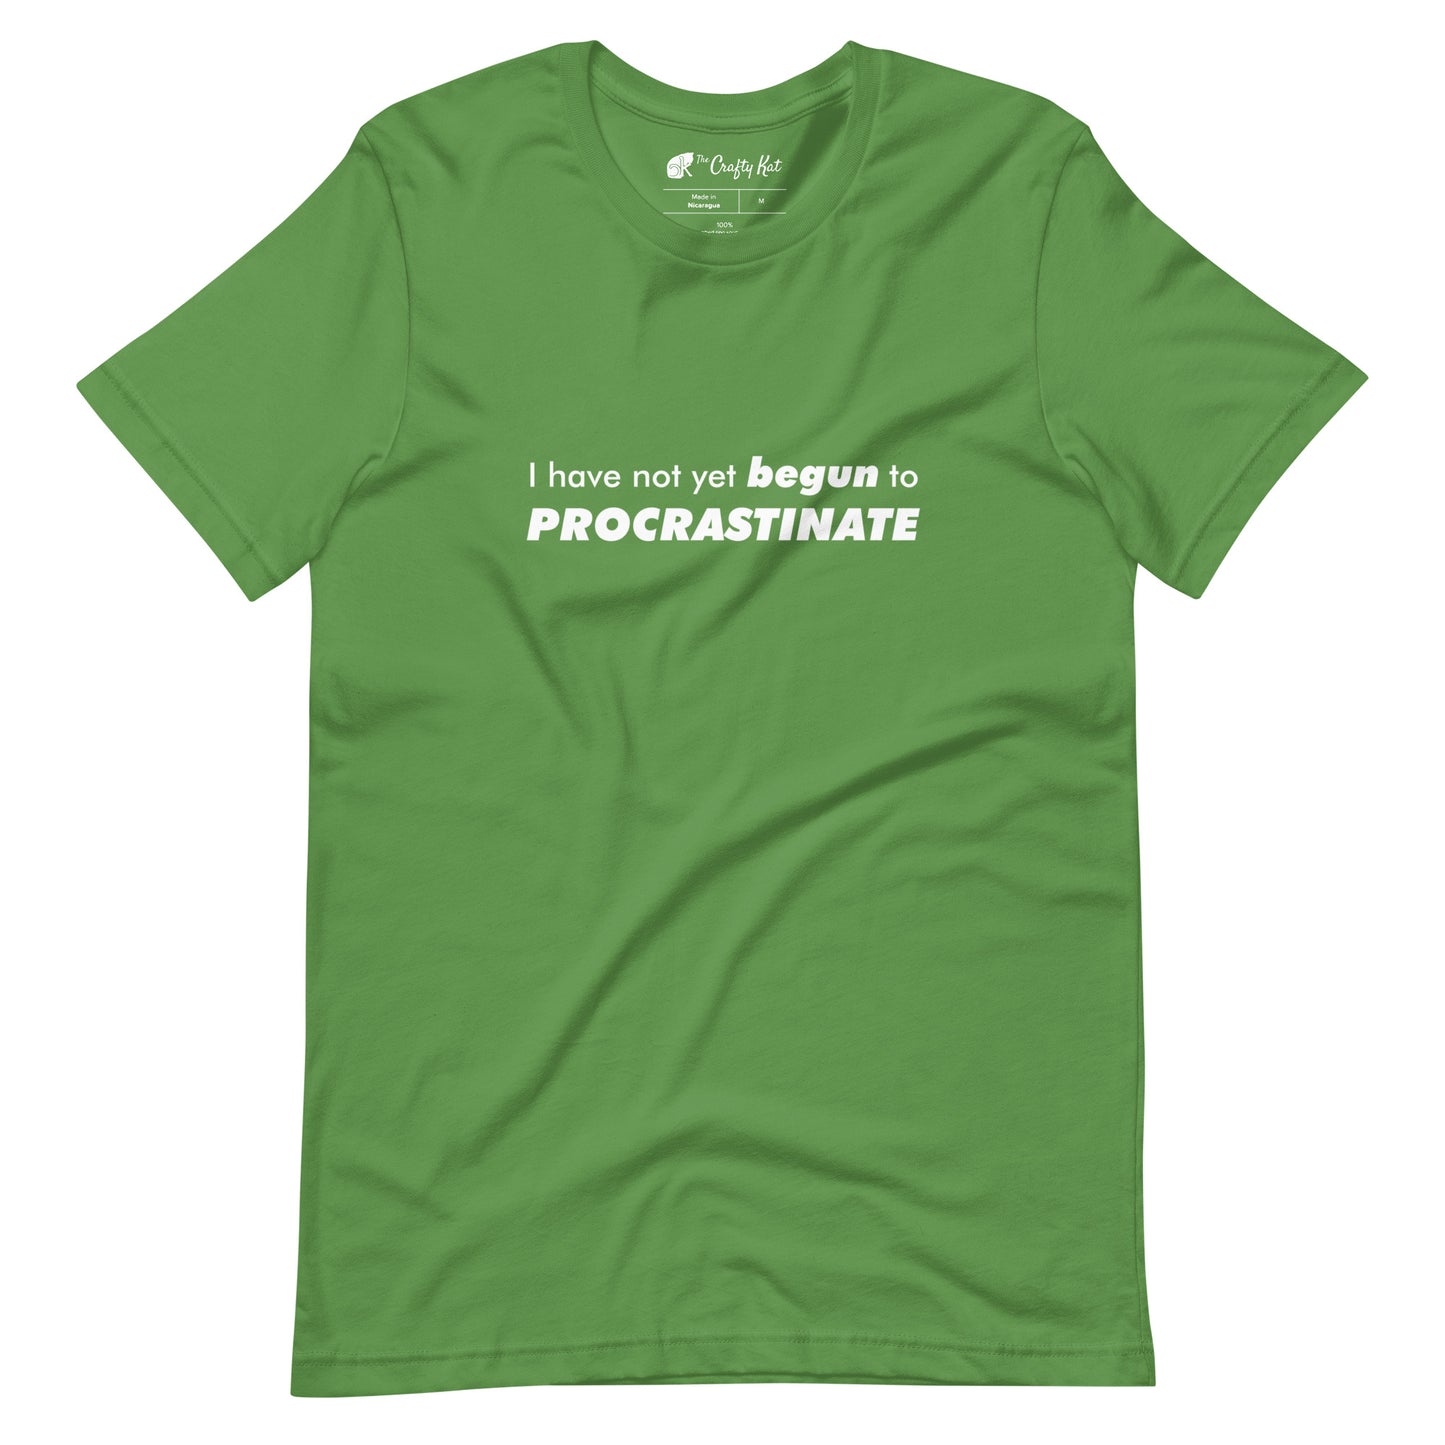 Leaf green t-shirt with text graphic: "I have not yet BEGUN to PROCRASTINATE"